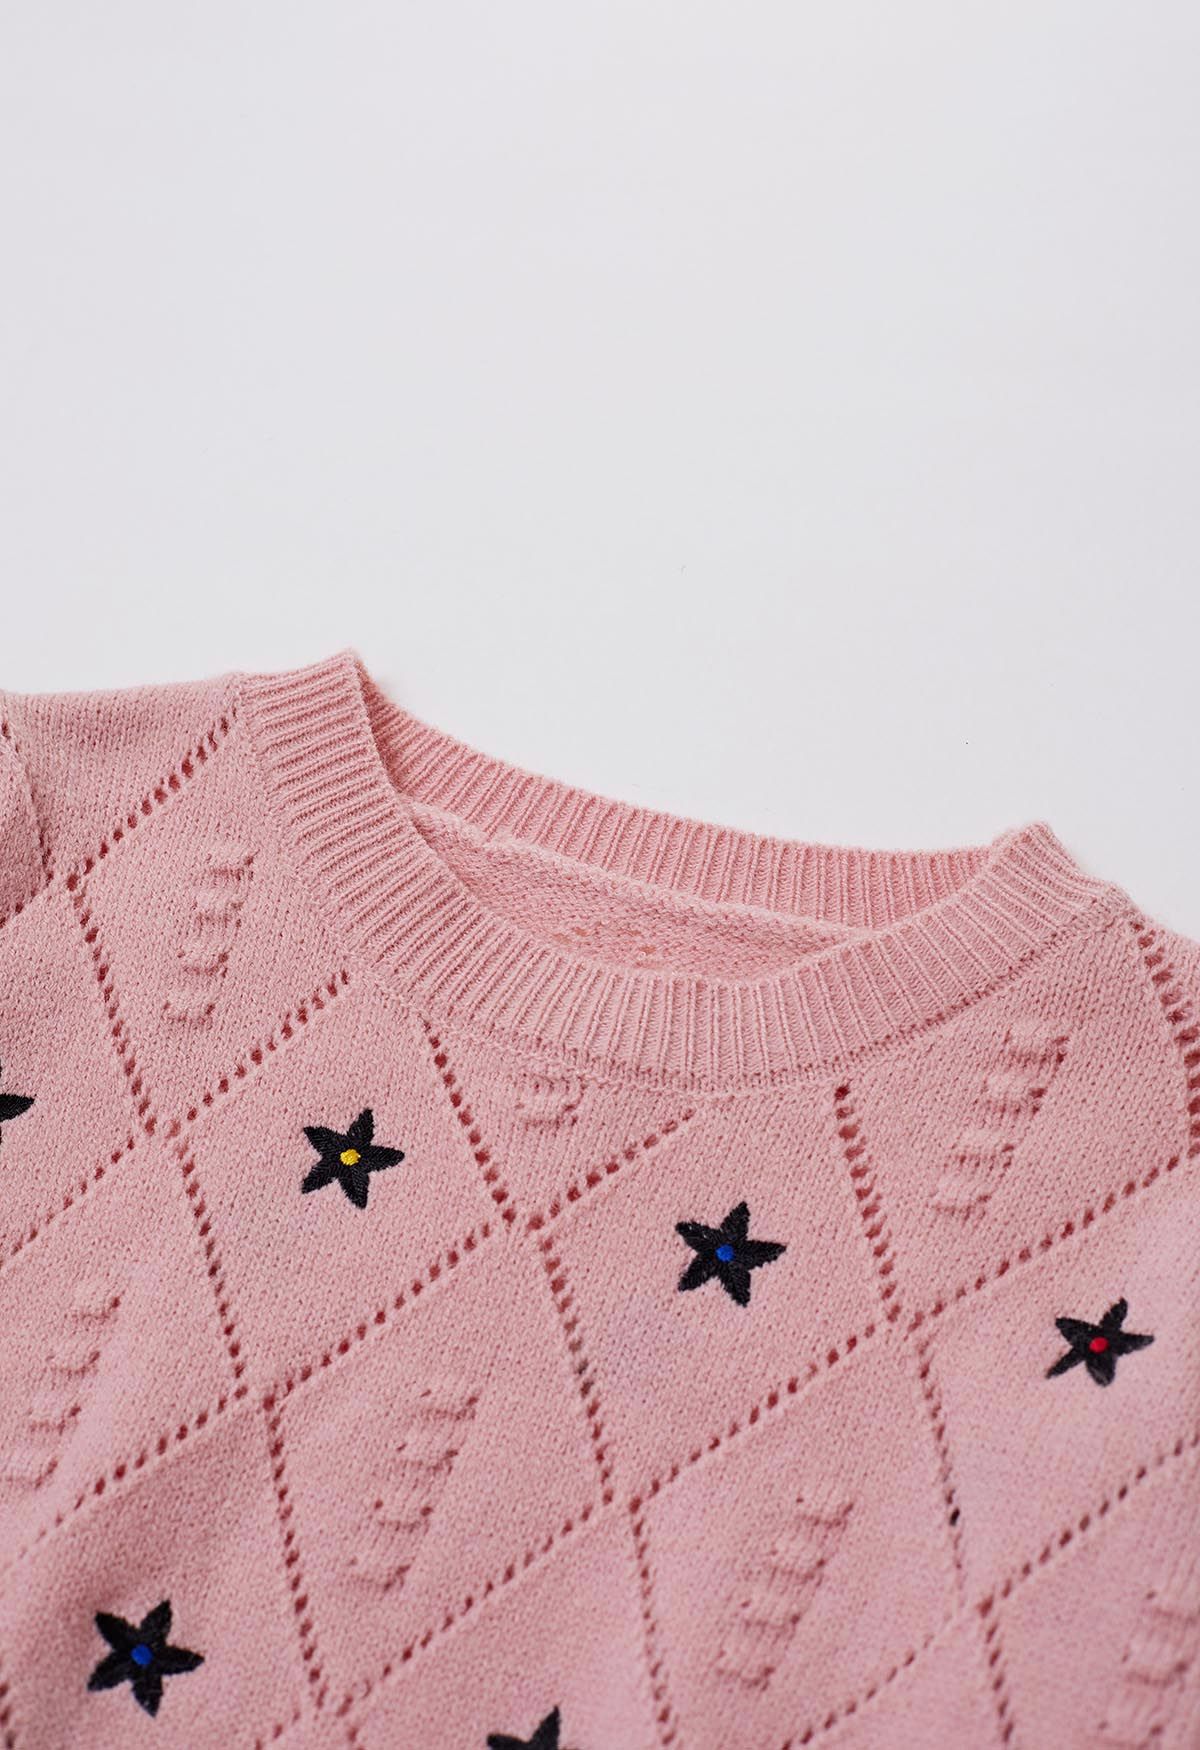 Star Embroidery Pointelle Knit Top in Pink